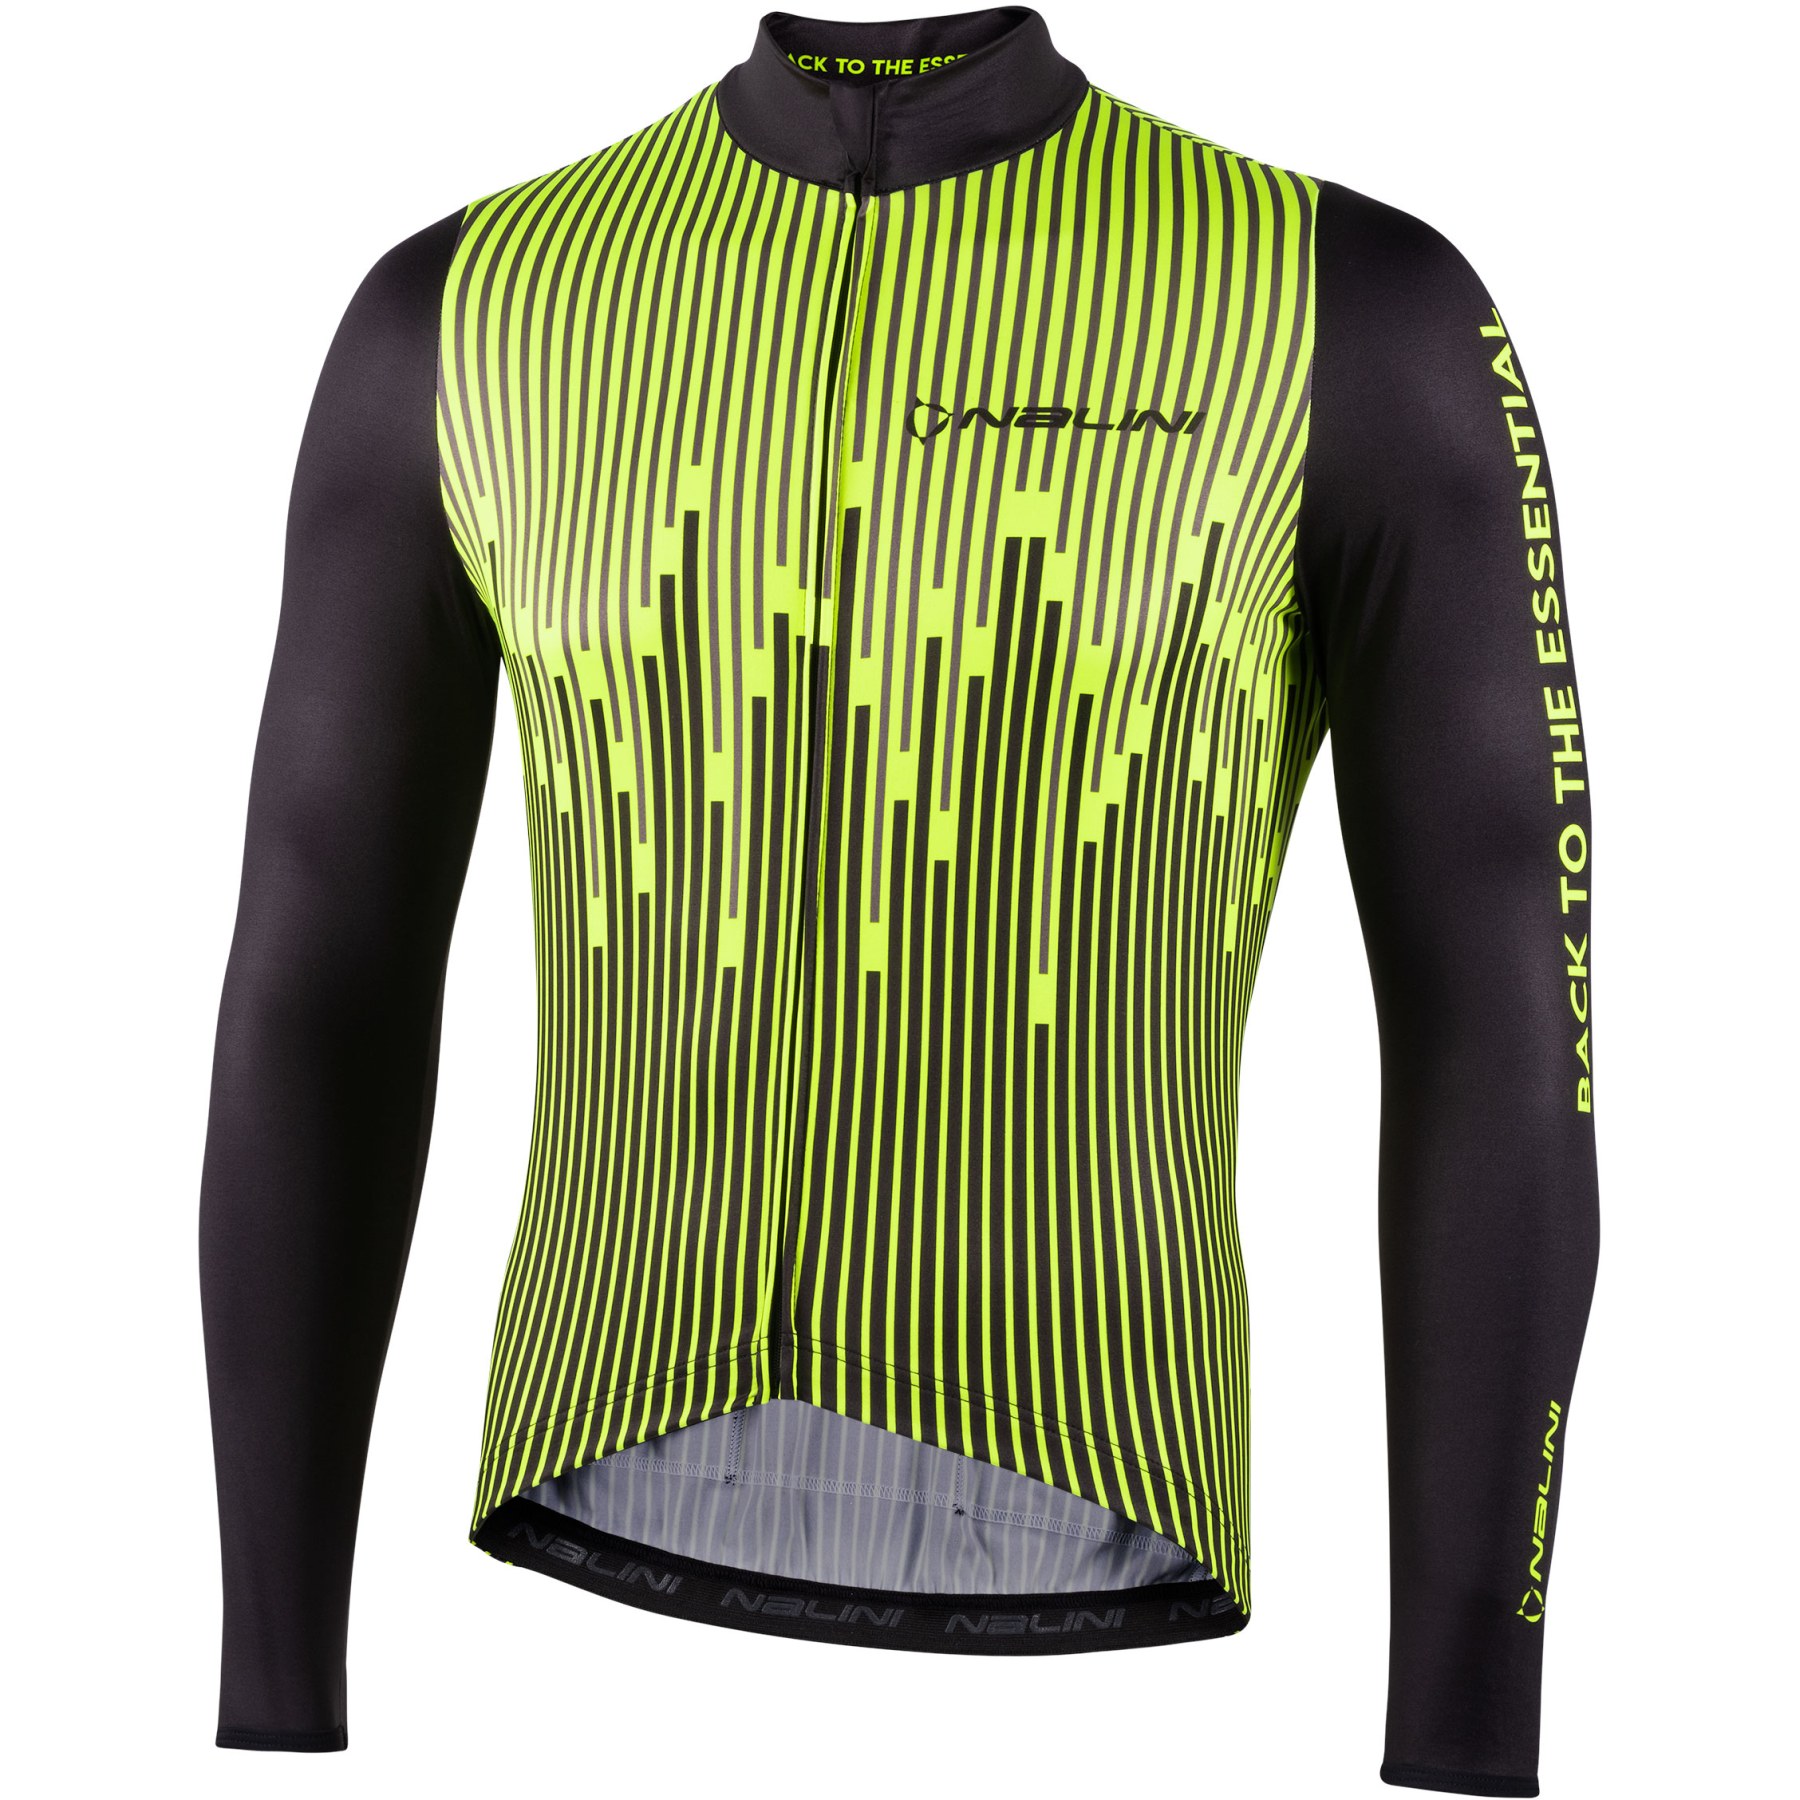 Picture of Nalini New Fit Long Sleeve Jersey - neon yellow/black 4050